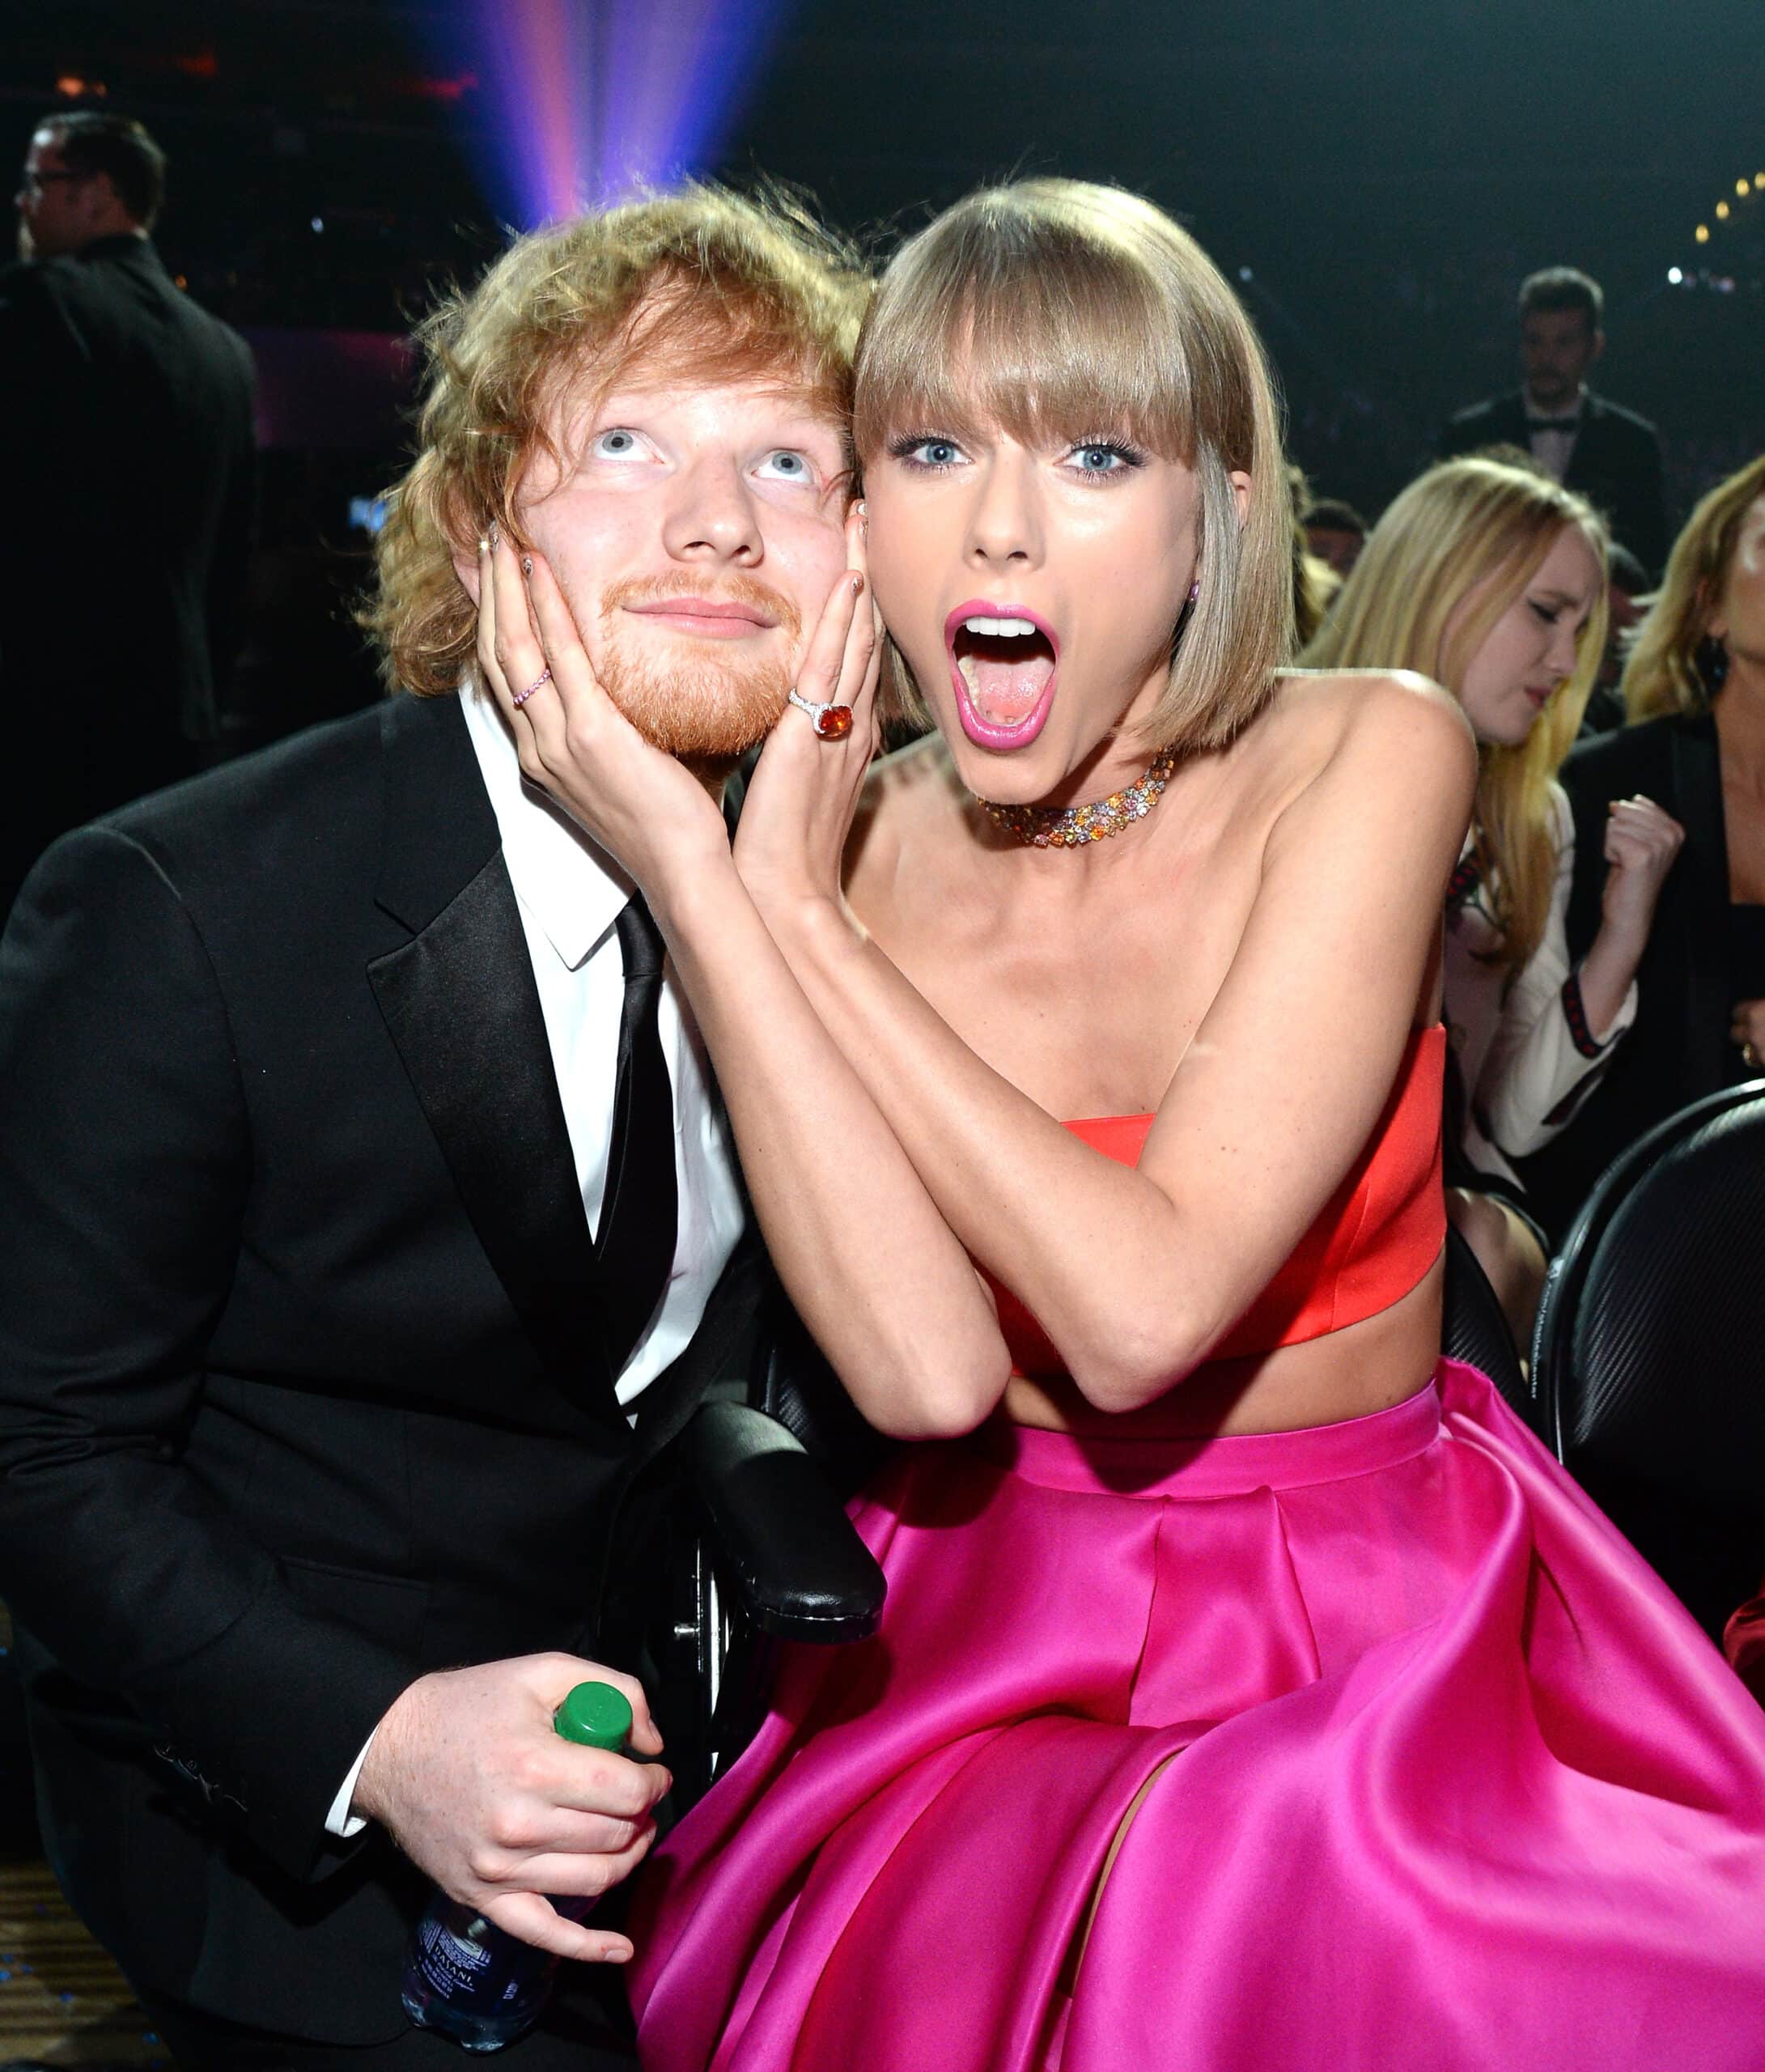 LOS ANGELES, CA - FEBRUARY 15: Ed Sheeran and Taylor Swift attends The 58th GRAMMY Awards at Staples Center on February 15, 2016 in Los Angeles, California. 